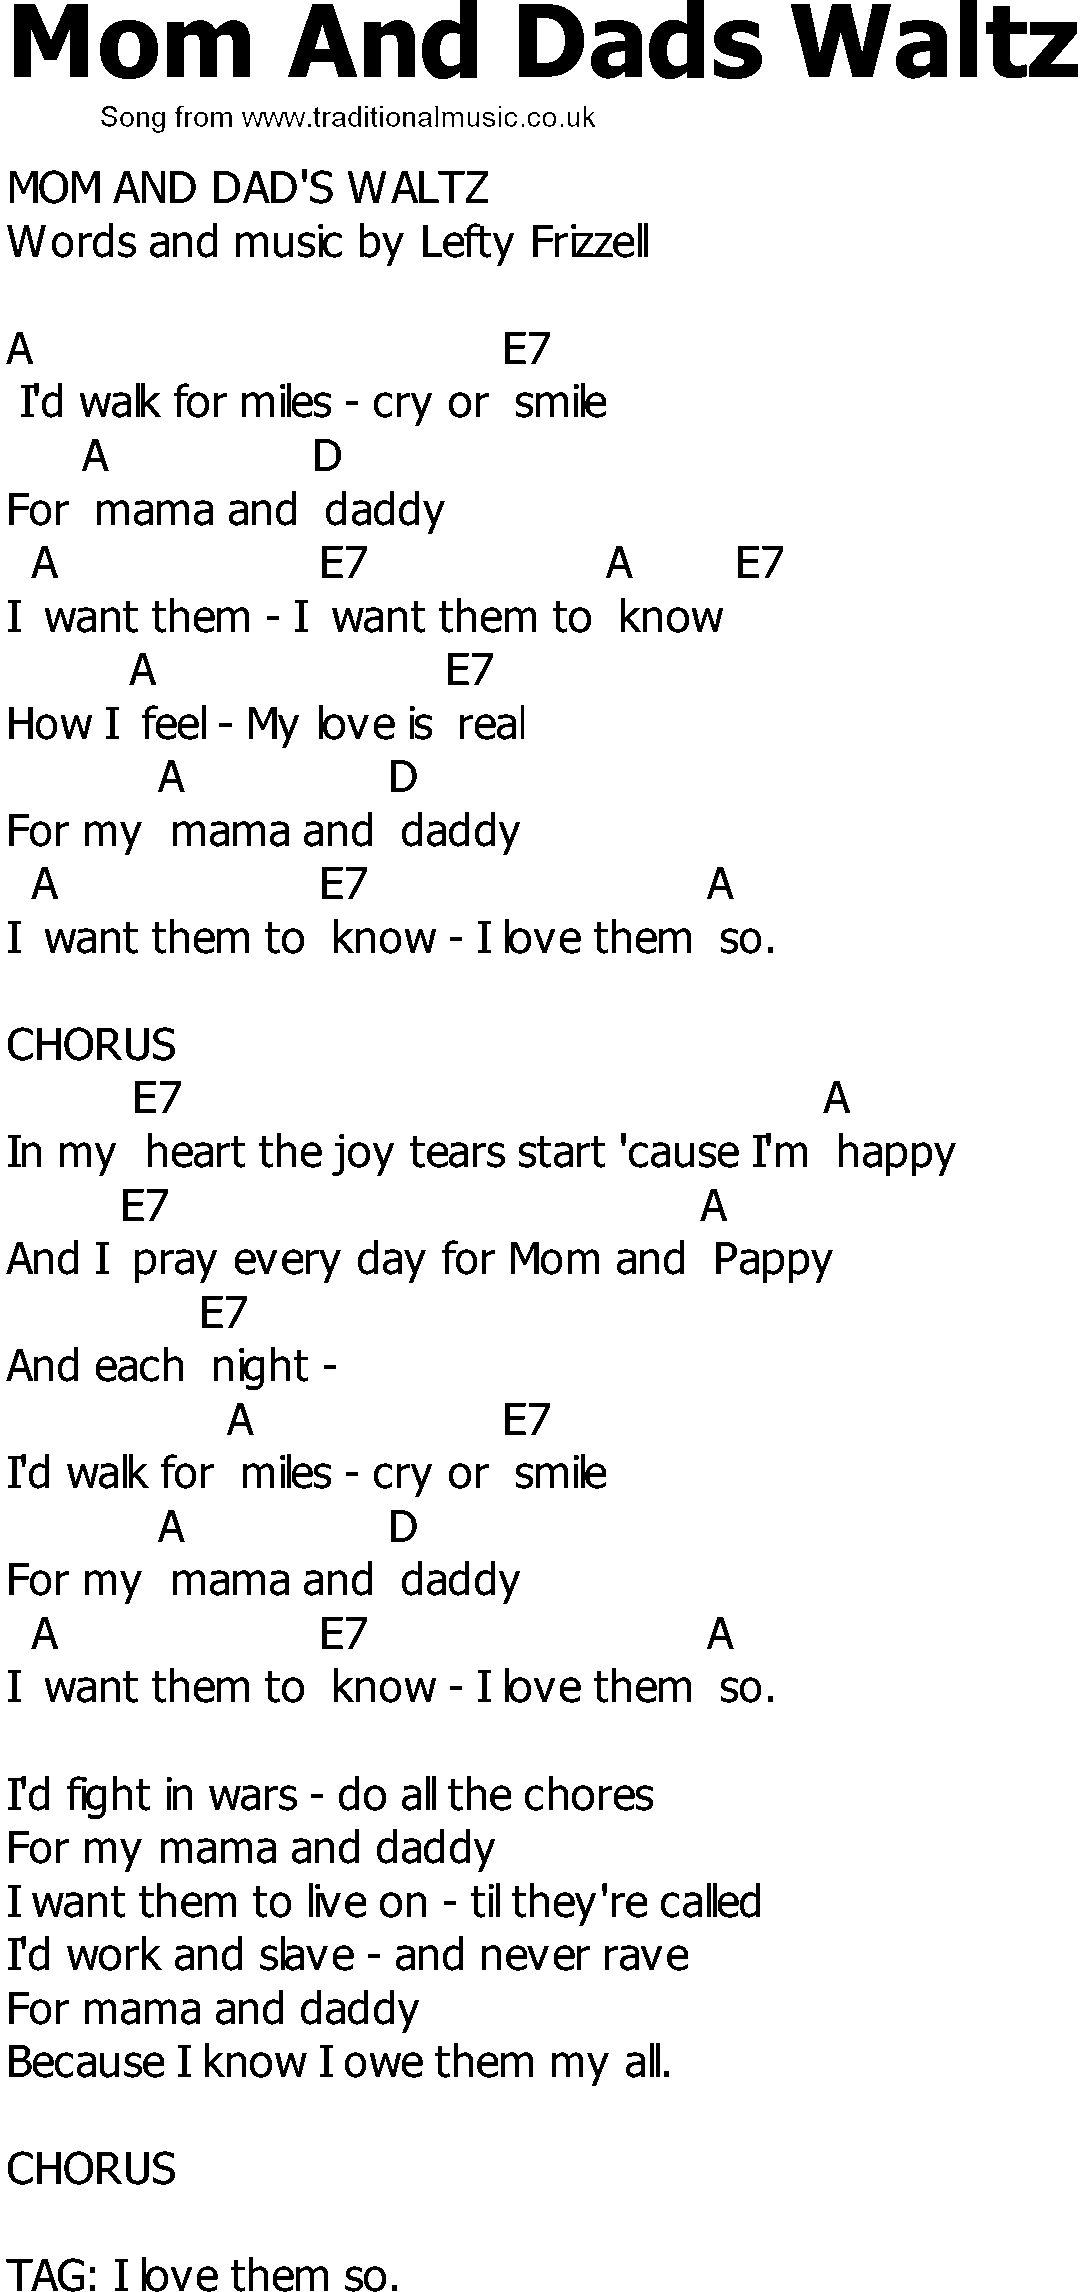 Old Country song lyrics with chords - Mom And Dads Waltz